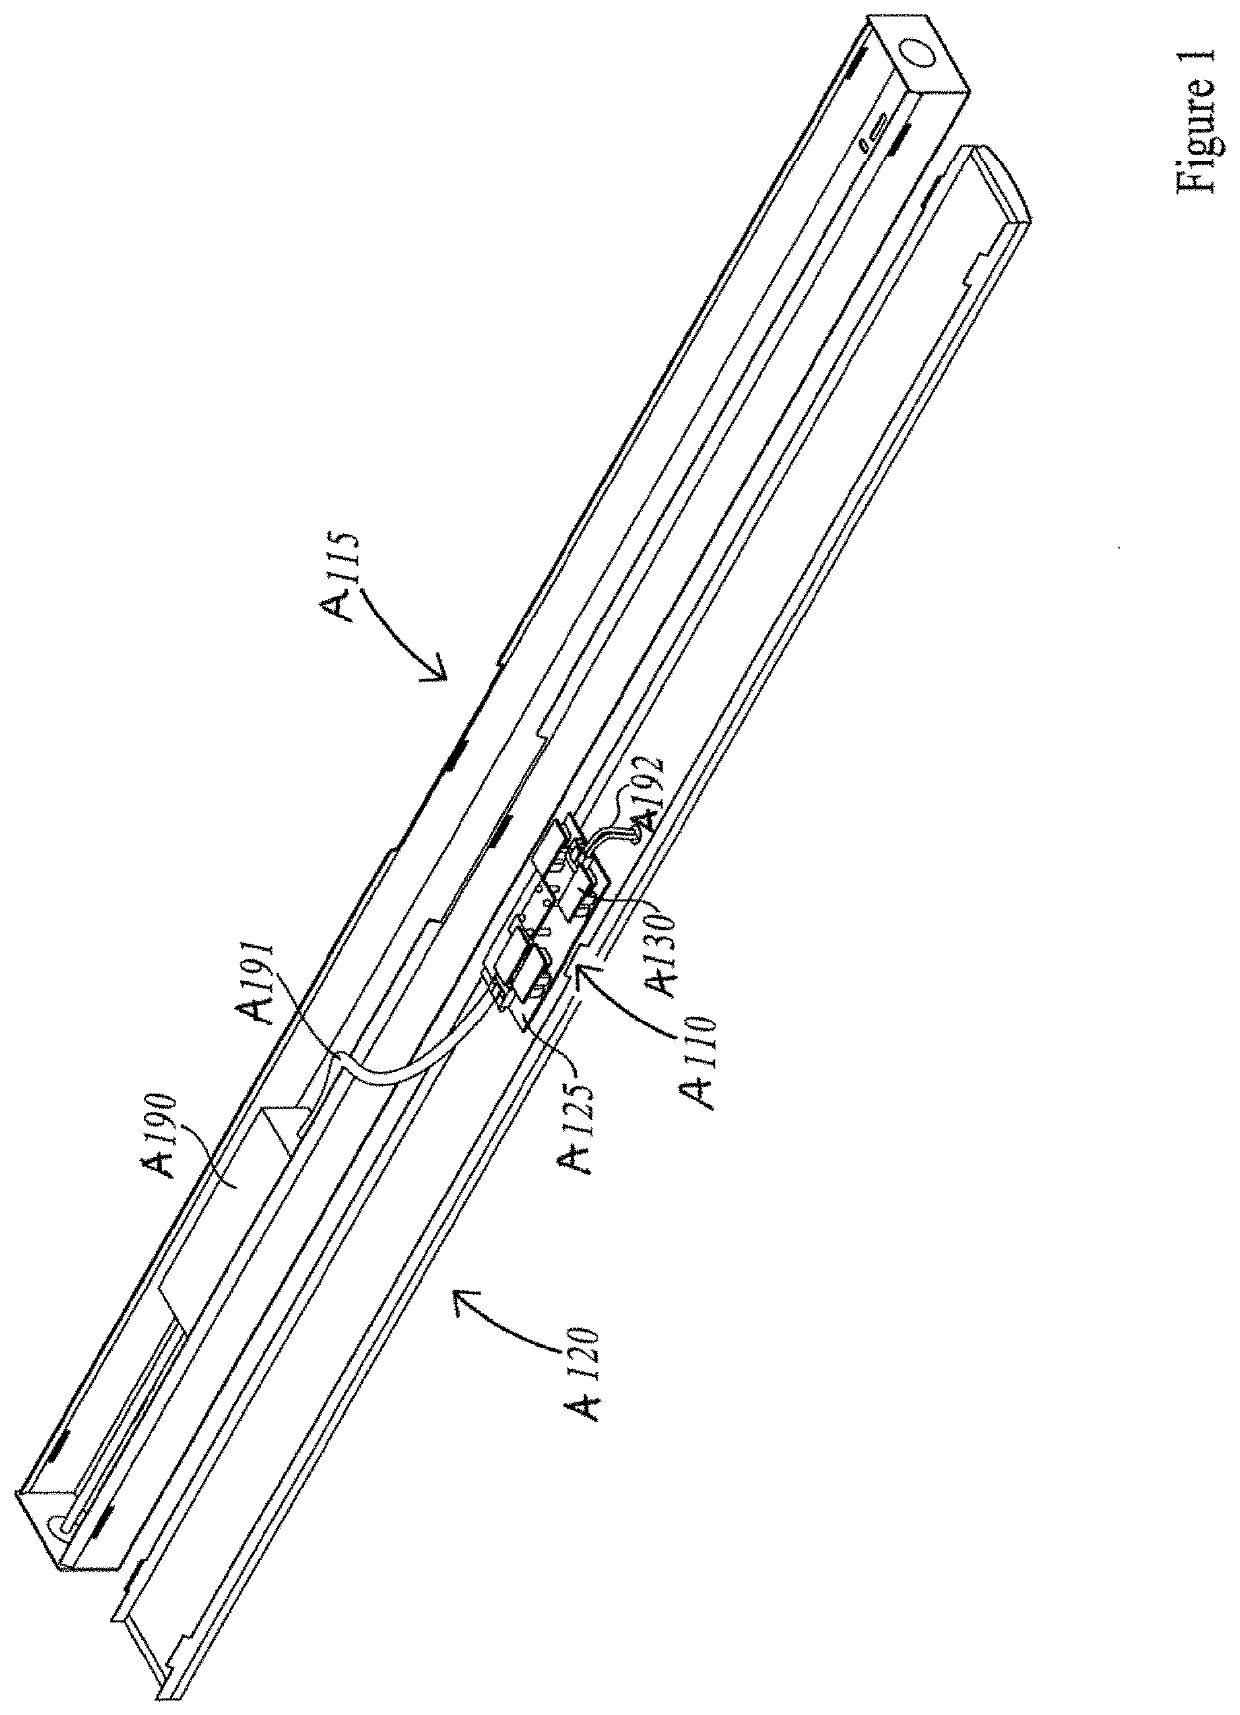 Lighting devices and methods